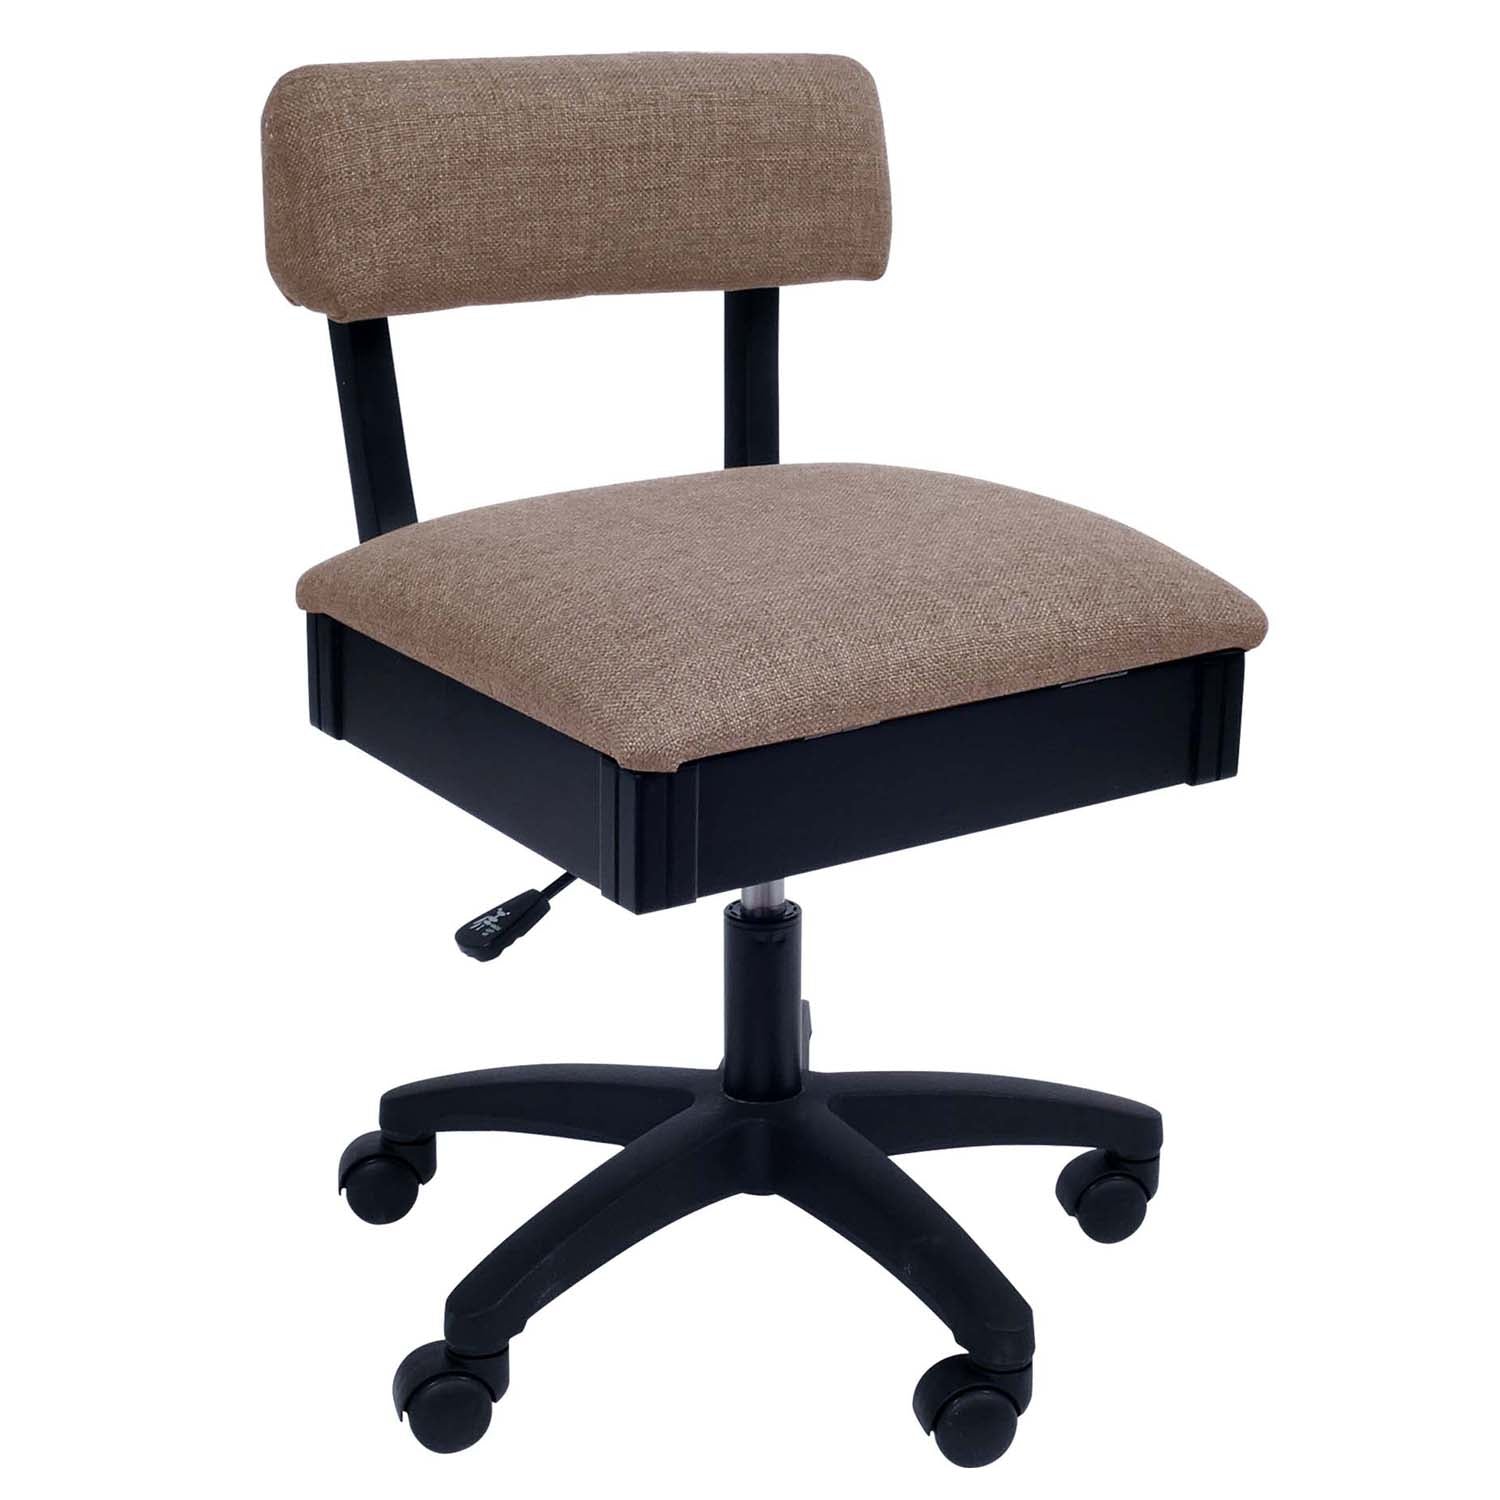 Try Out The Sew Wow Sew Now Hydraulic Sewing Chair!